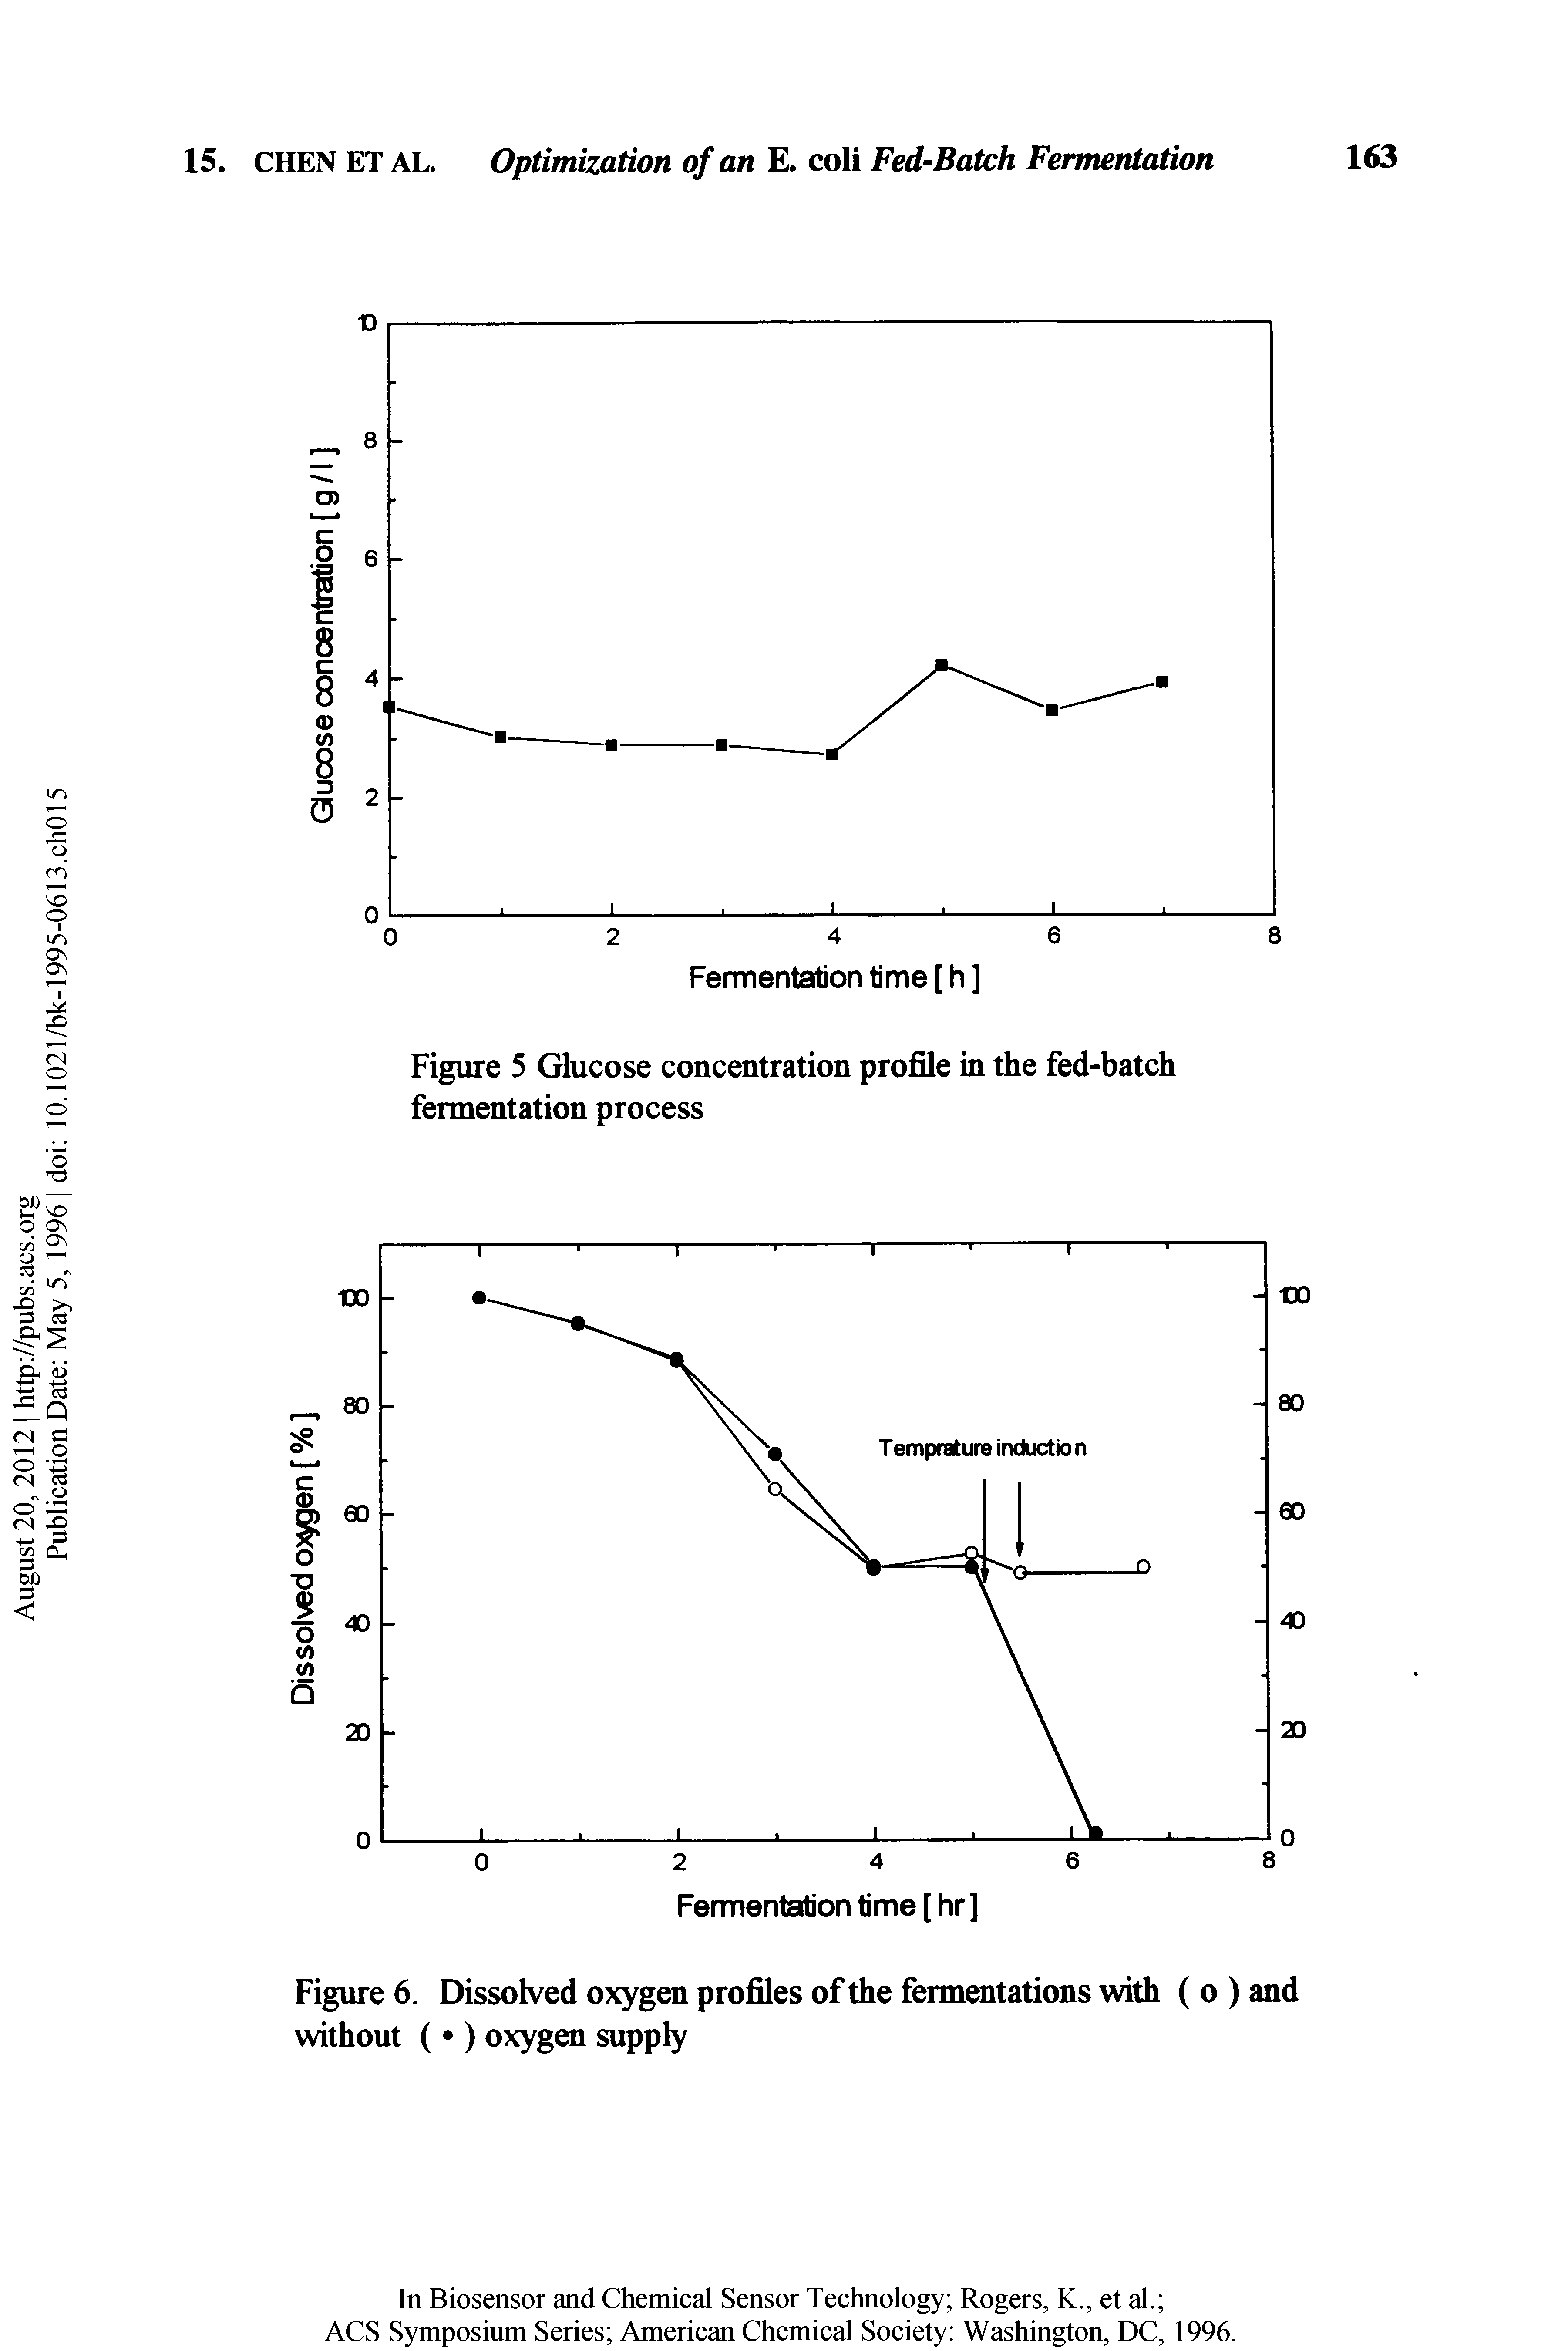 Figure 5 Glucose concentration profile in the fed-batch fermentation process...